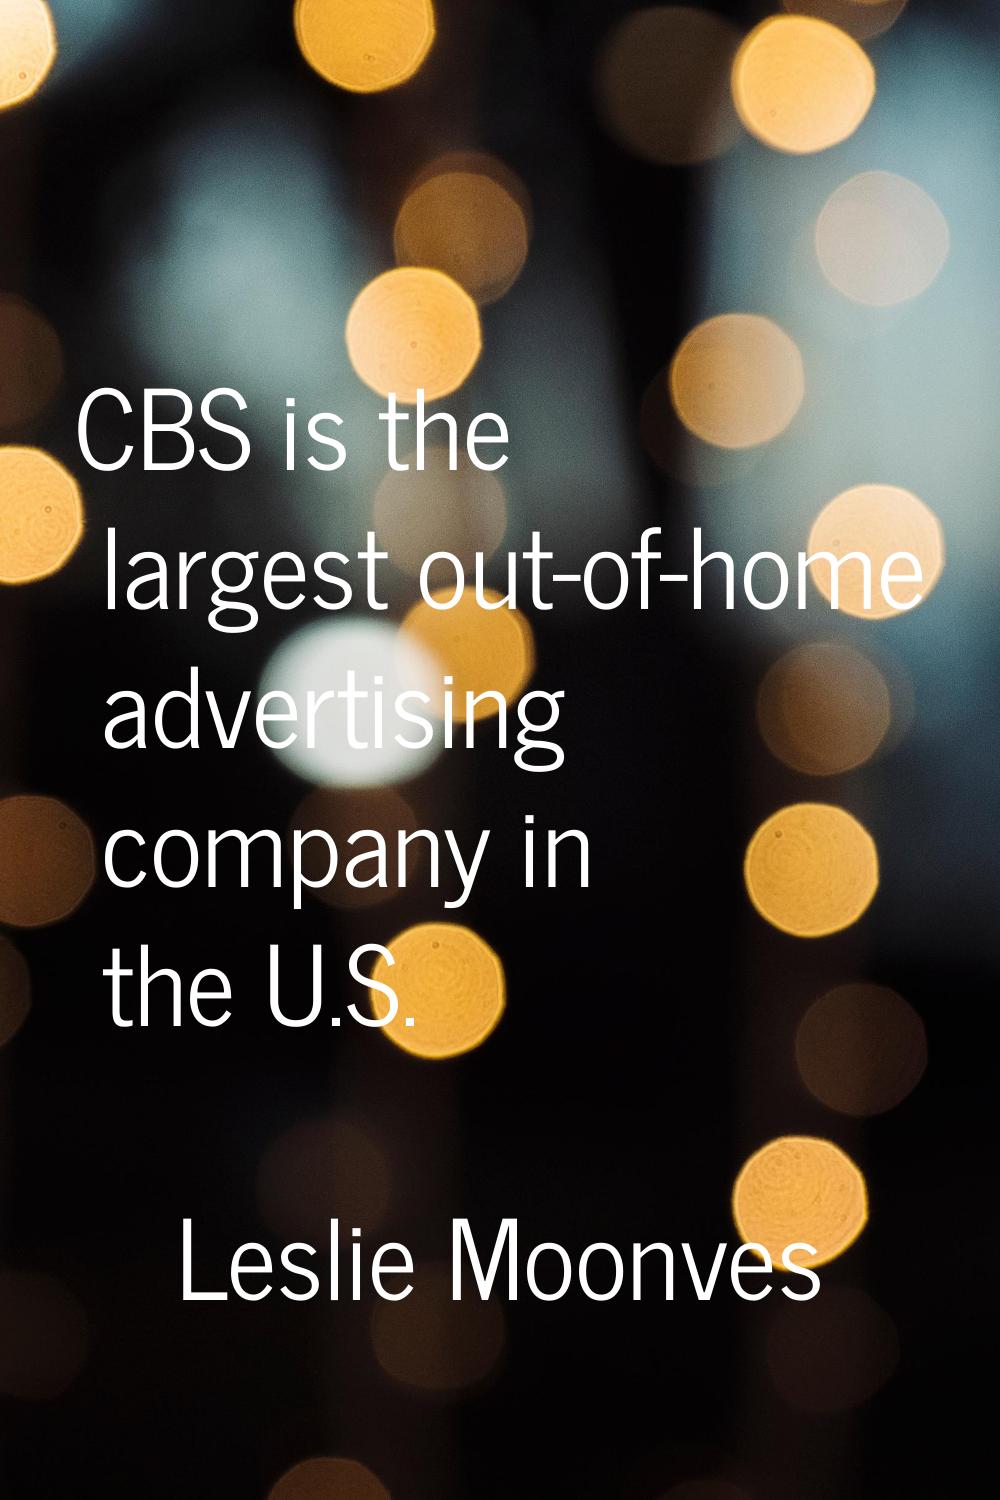 CBS is the largest out-of-home advertising company in the U.S.